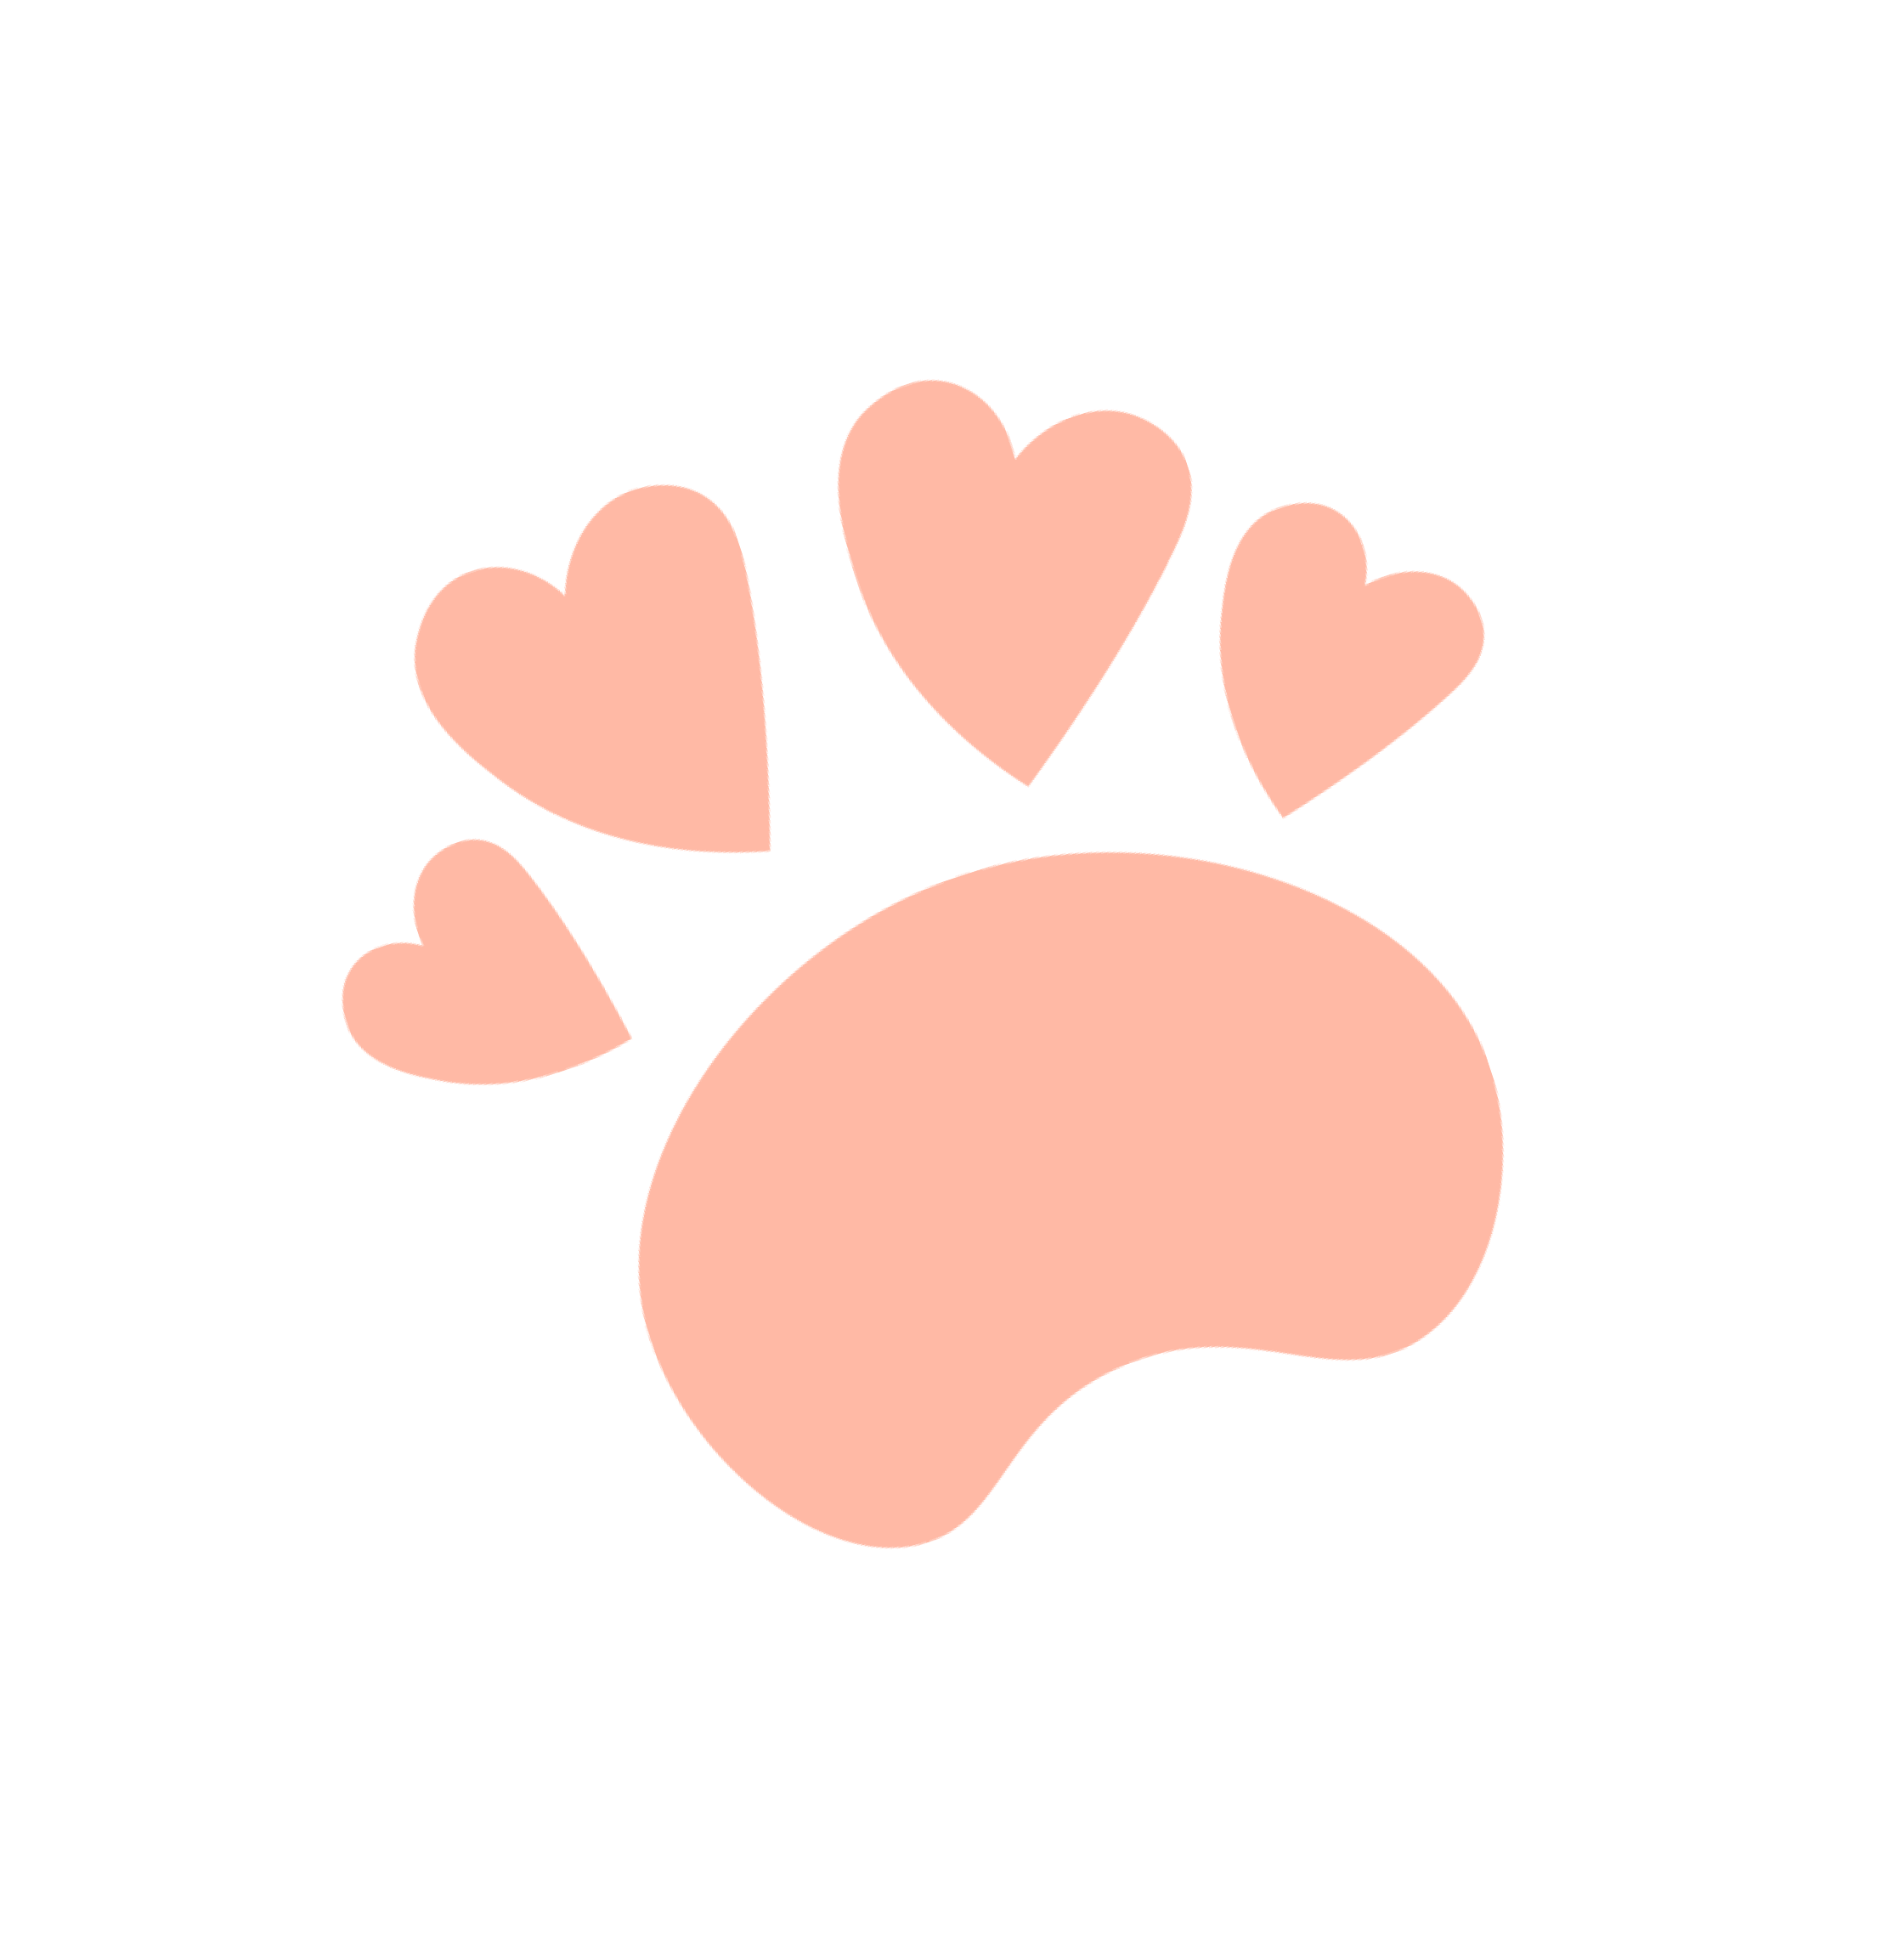 Small Dog Photo at Convenience Pet Hospital in Golden Co heart paw print icon